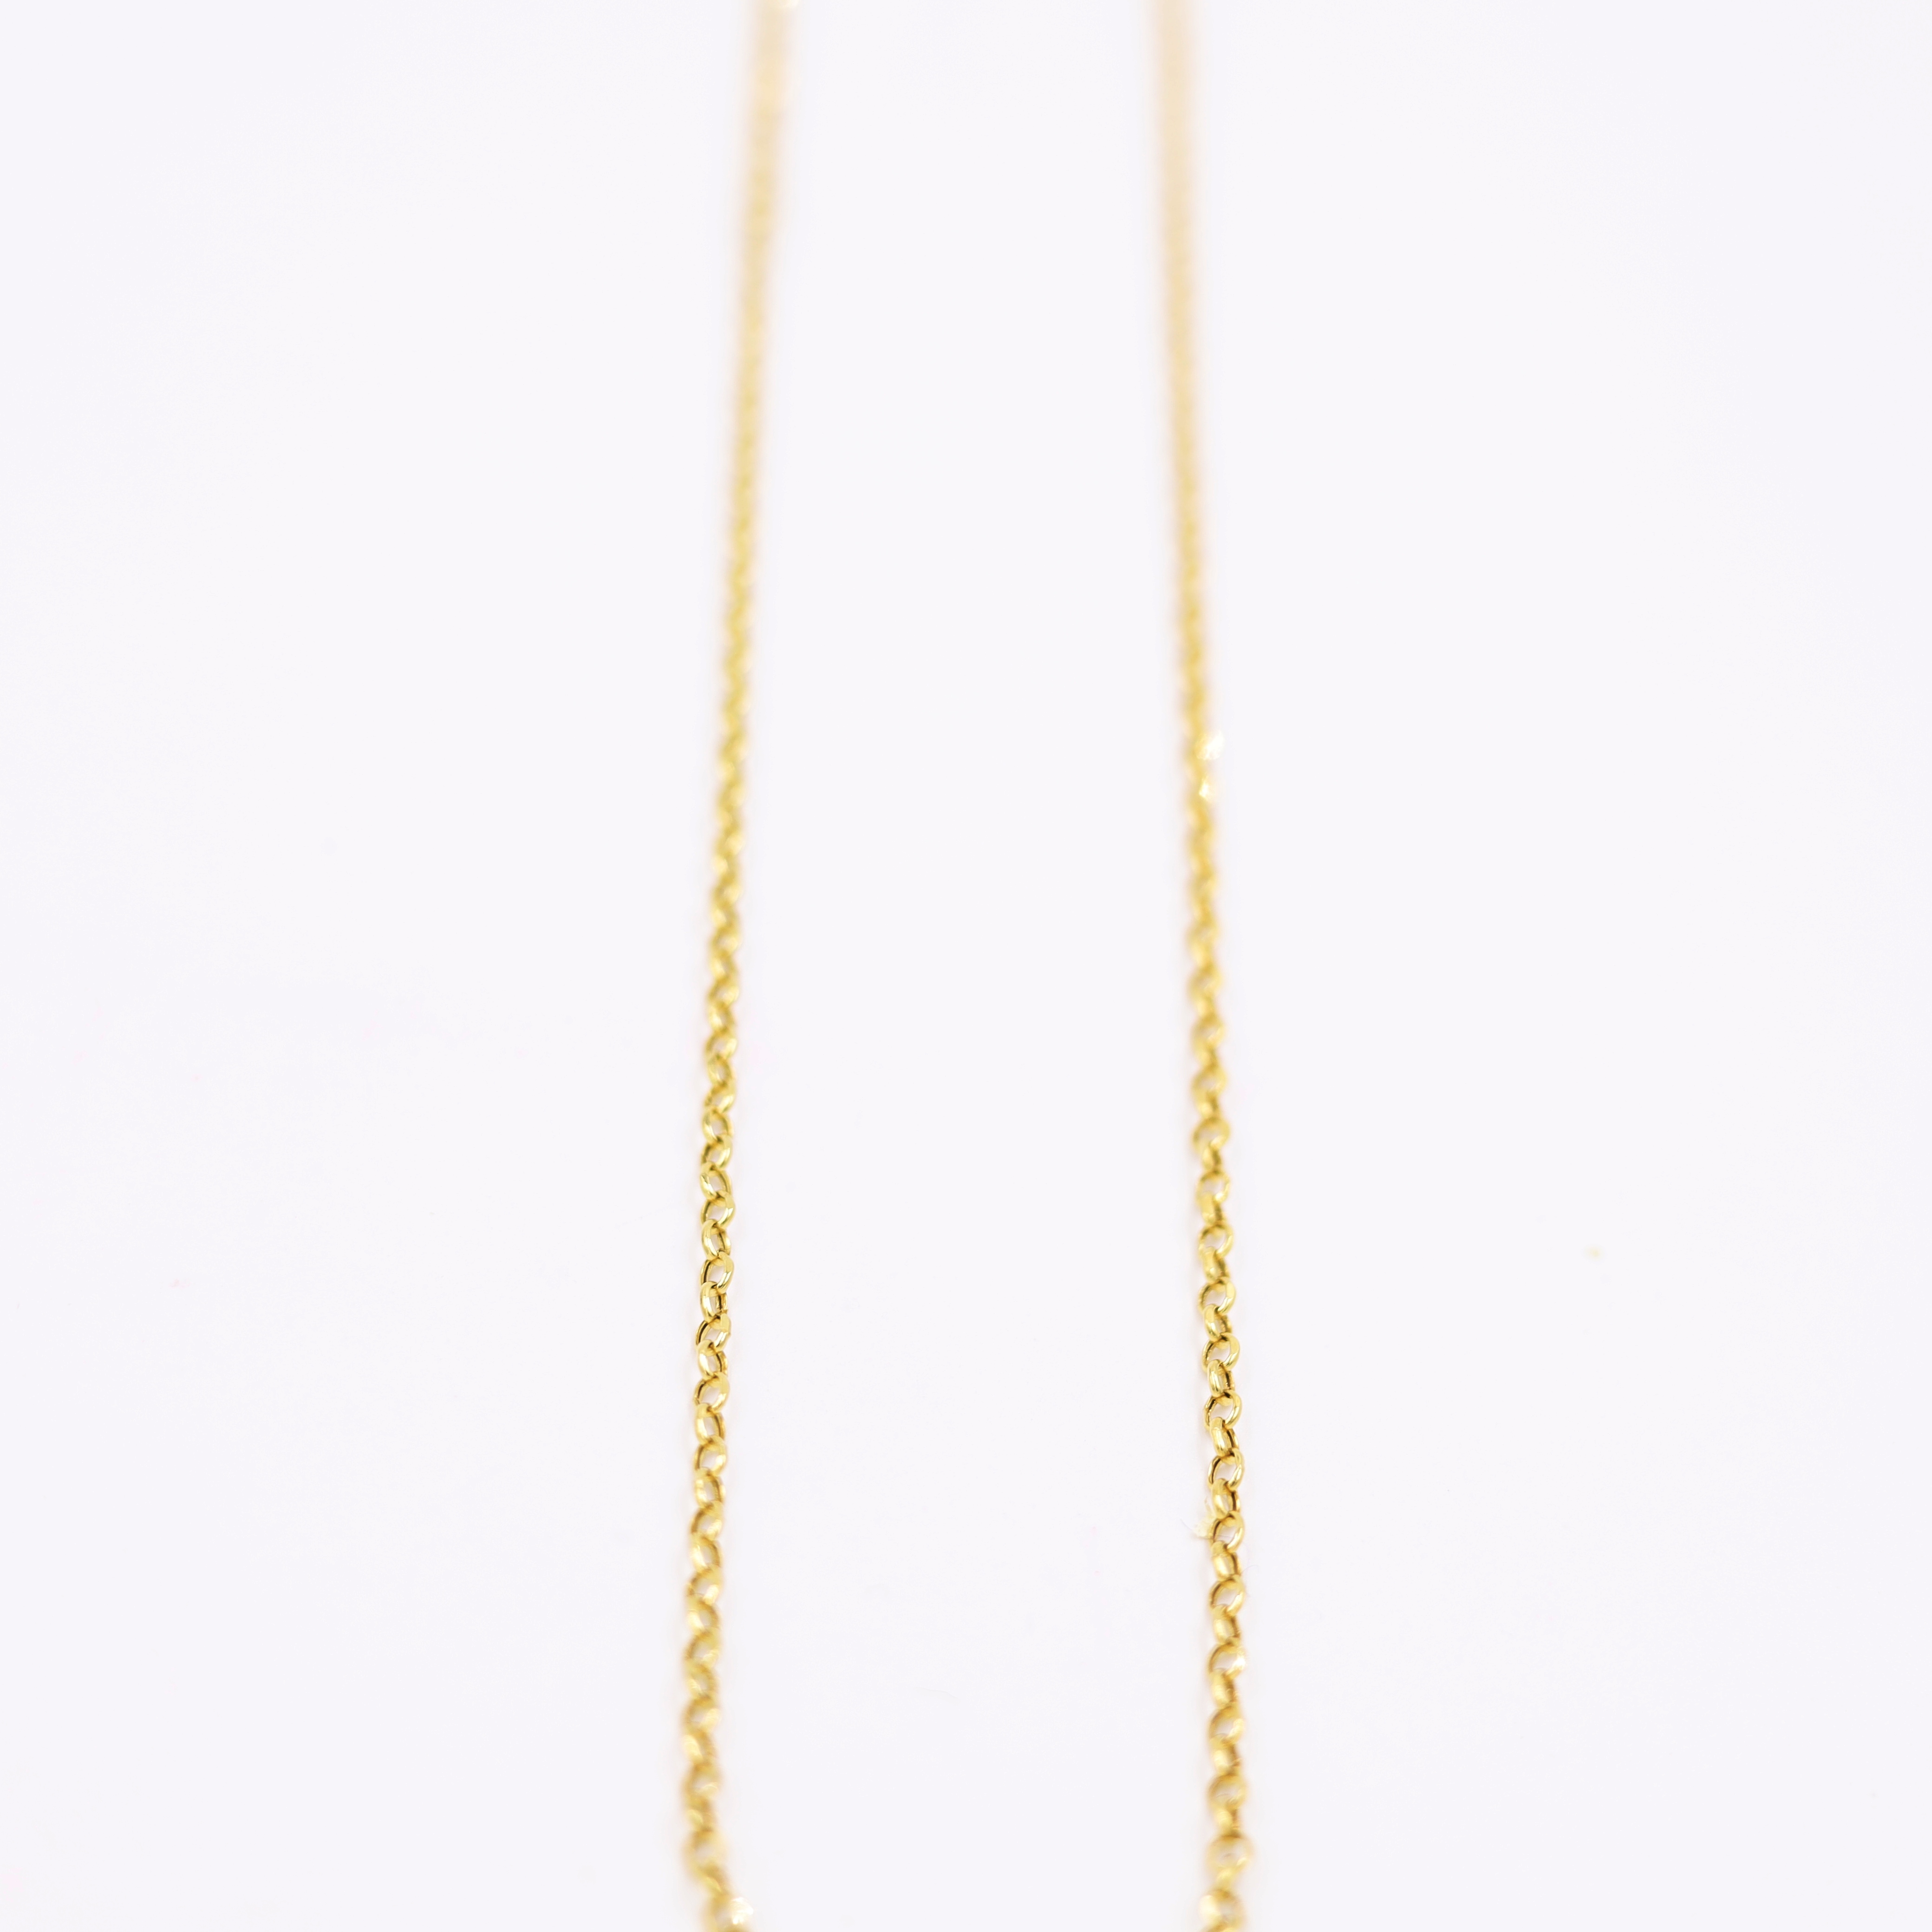 18KT Yellow Gold Imported Chain